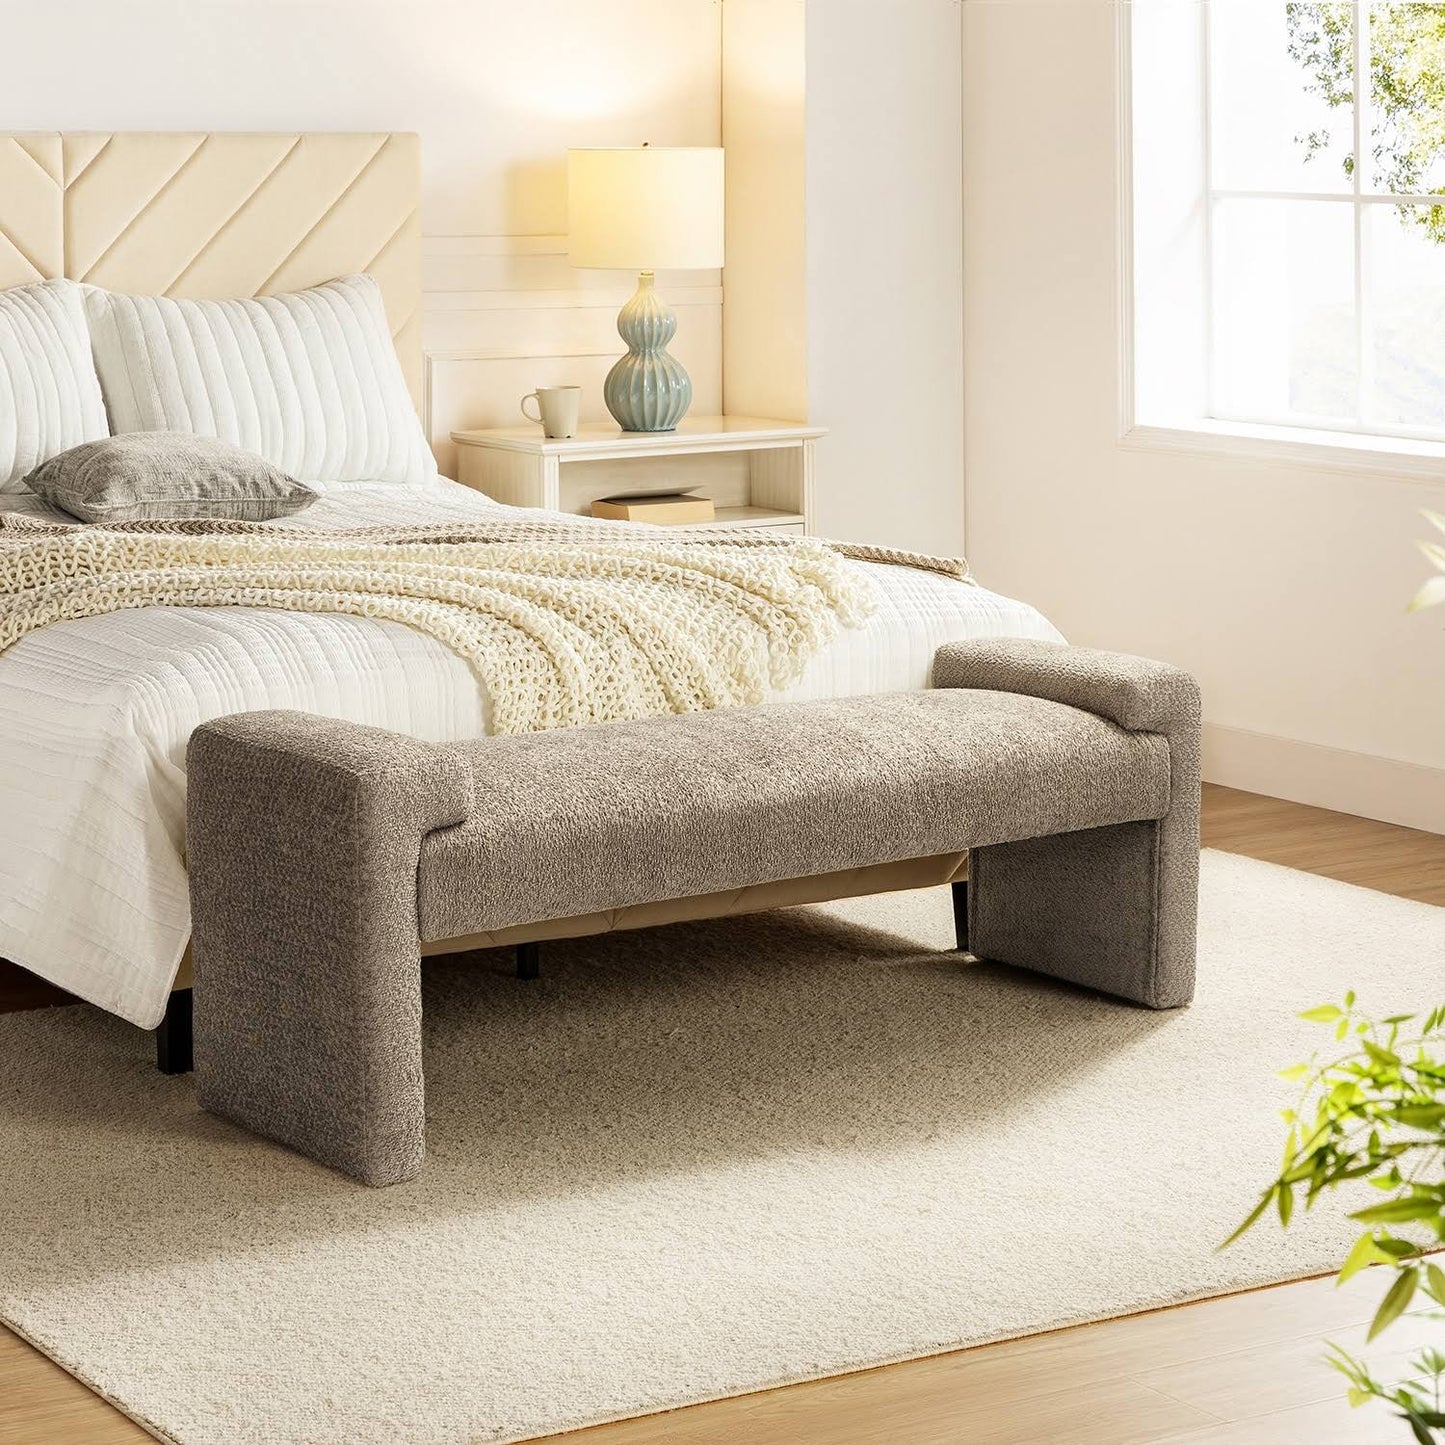 Upholstered Bedroom Bench By Hulala Home